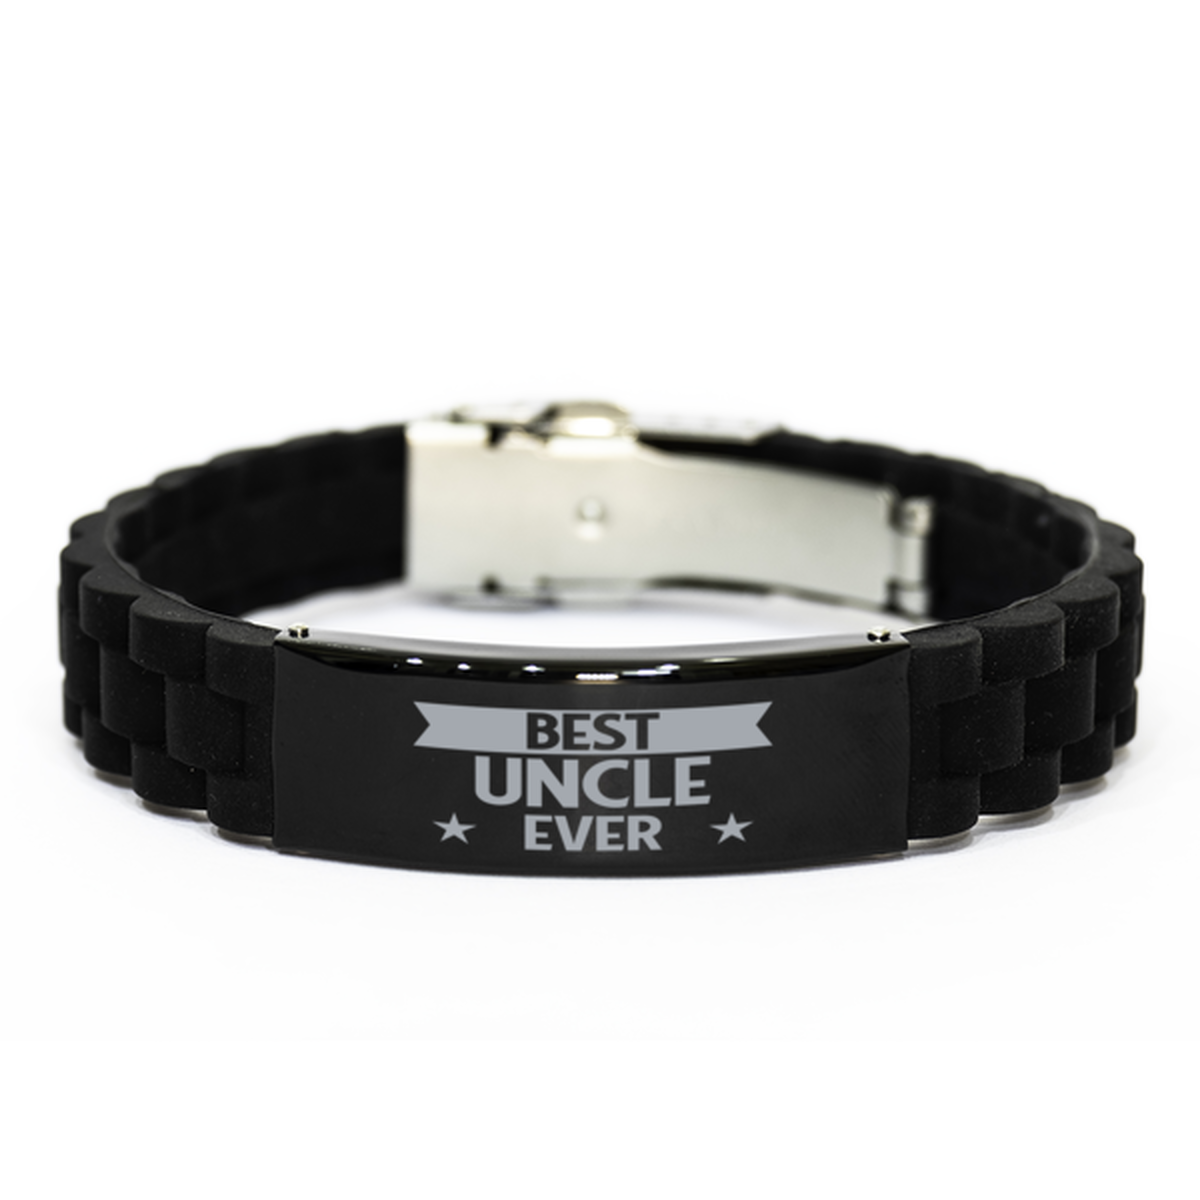 Best Uncle Ever Uncle Gifts, Funny Black Engraved Bracelet For Uncle, Family Gifts For Men